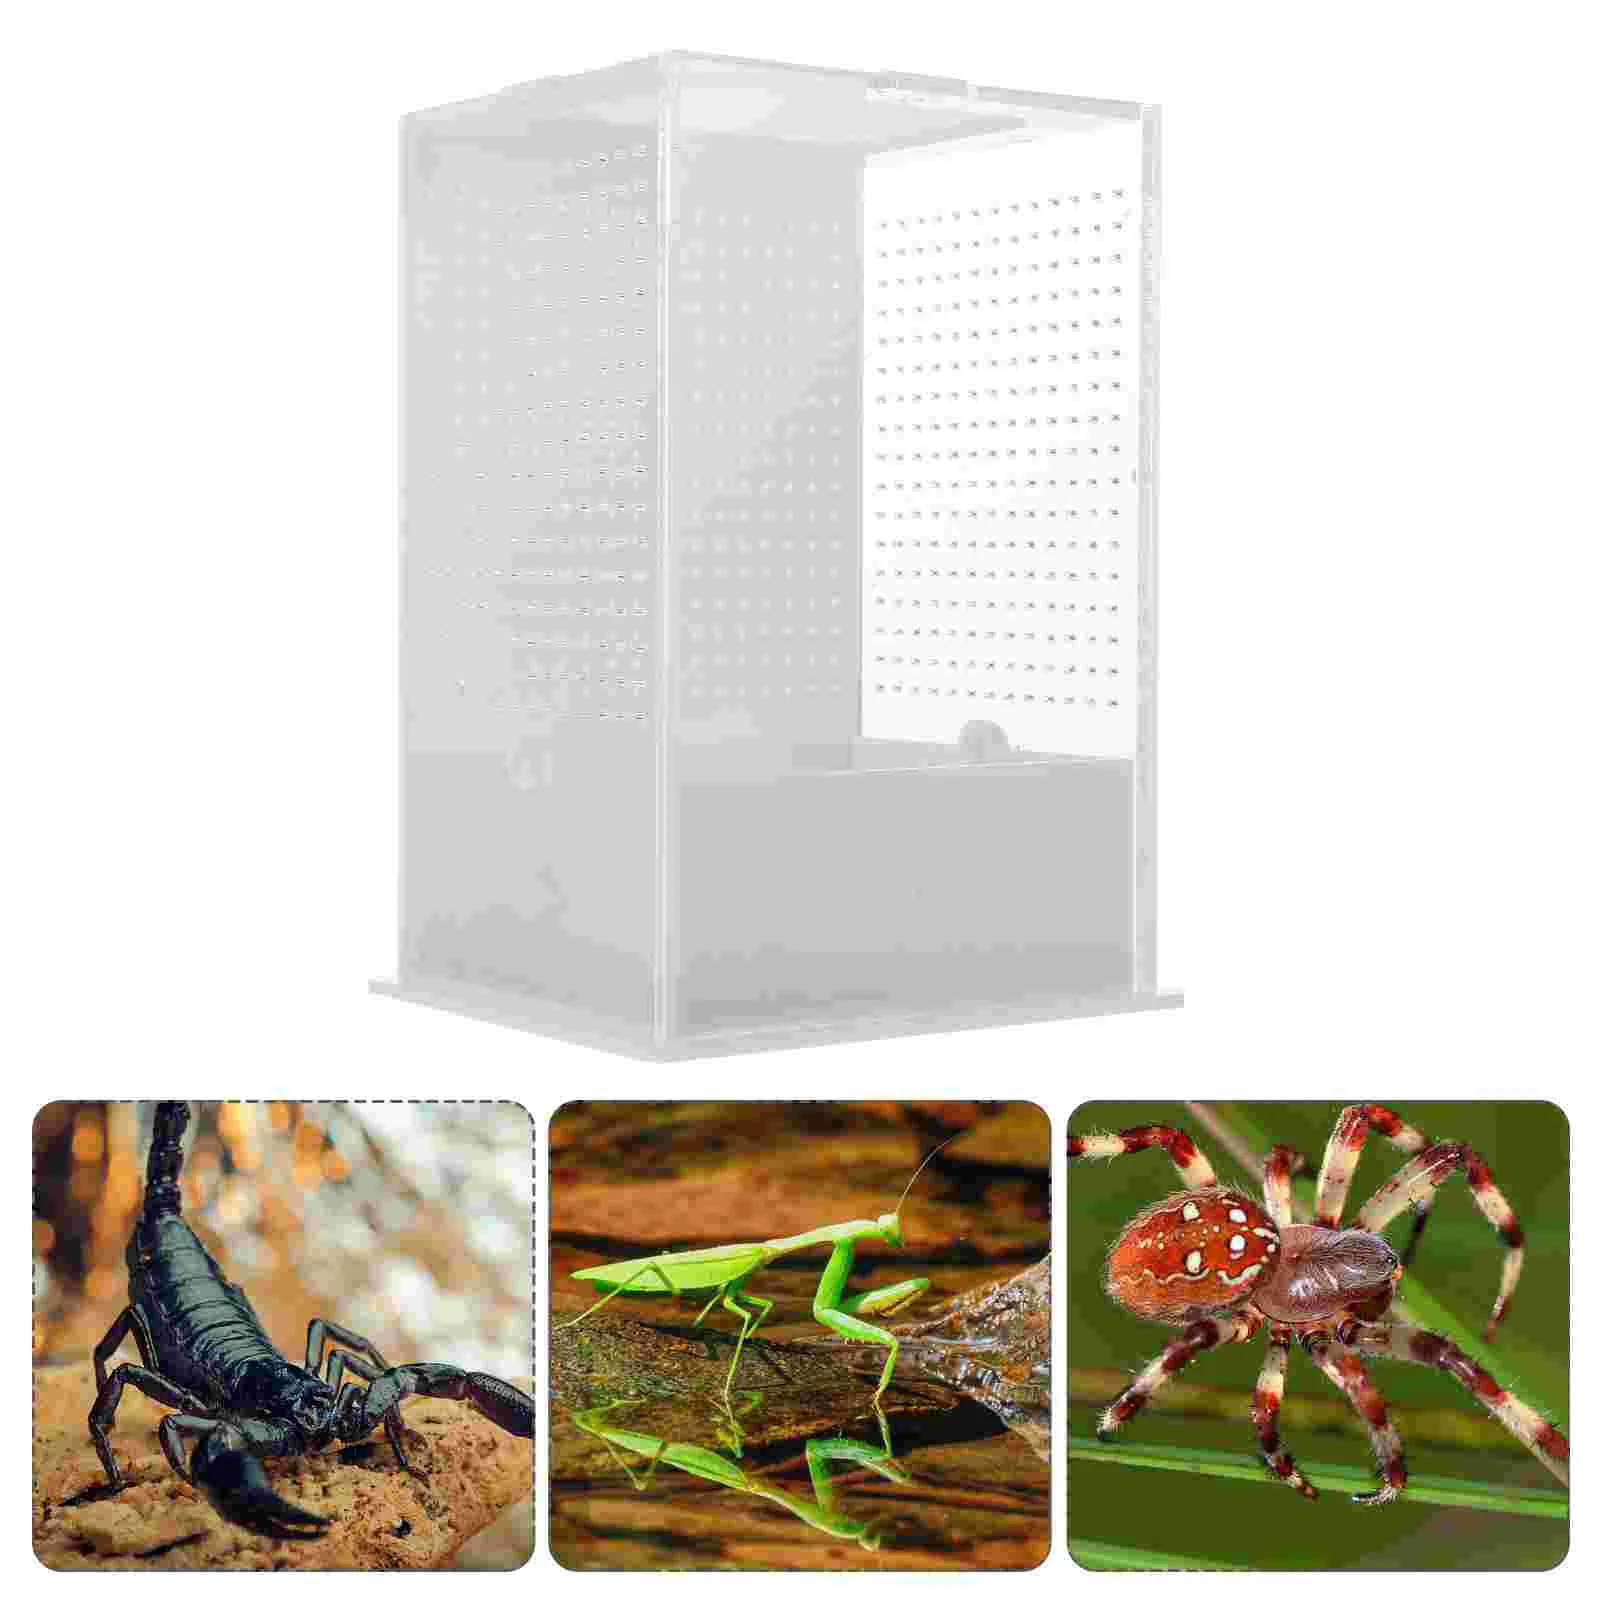 

Box Container Insect Reptile Breeding Observation Feeding Enclosure Worm Tank Acrylic Dishtarantula Landscape Insects Case